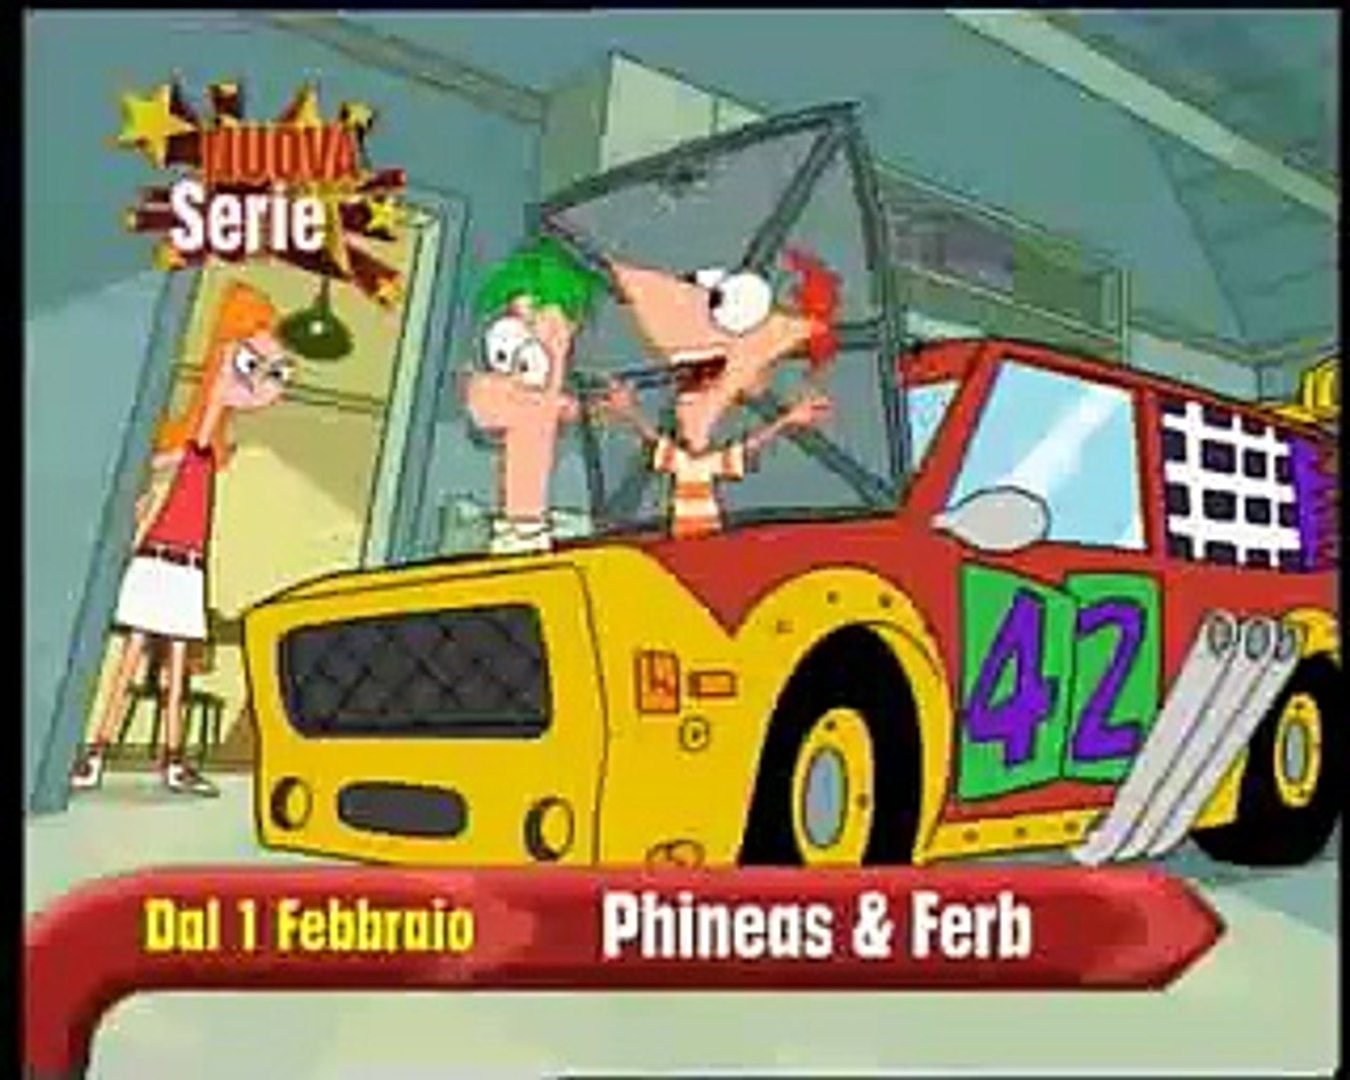 Phineas and Ferb Preview #1 - Disney Channel Italy - video Dailymotion